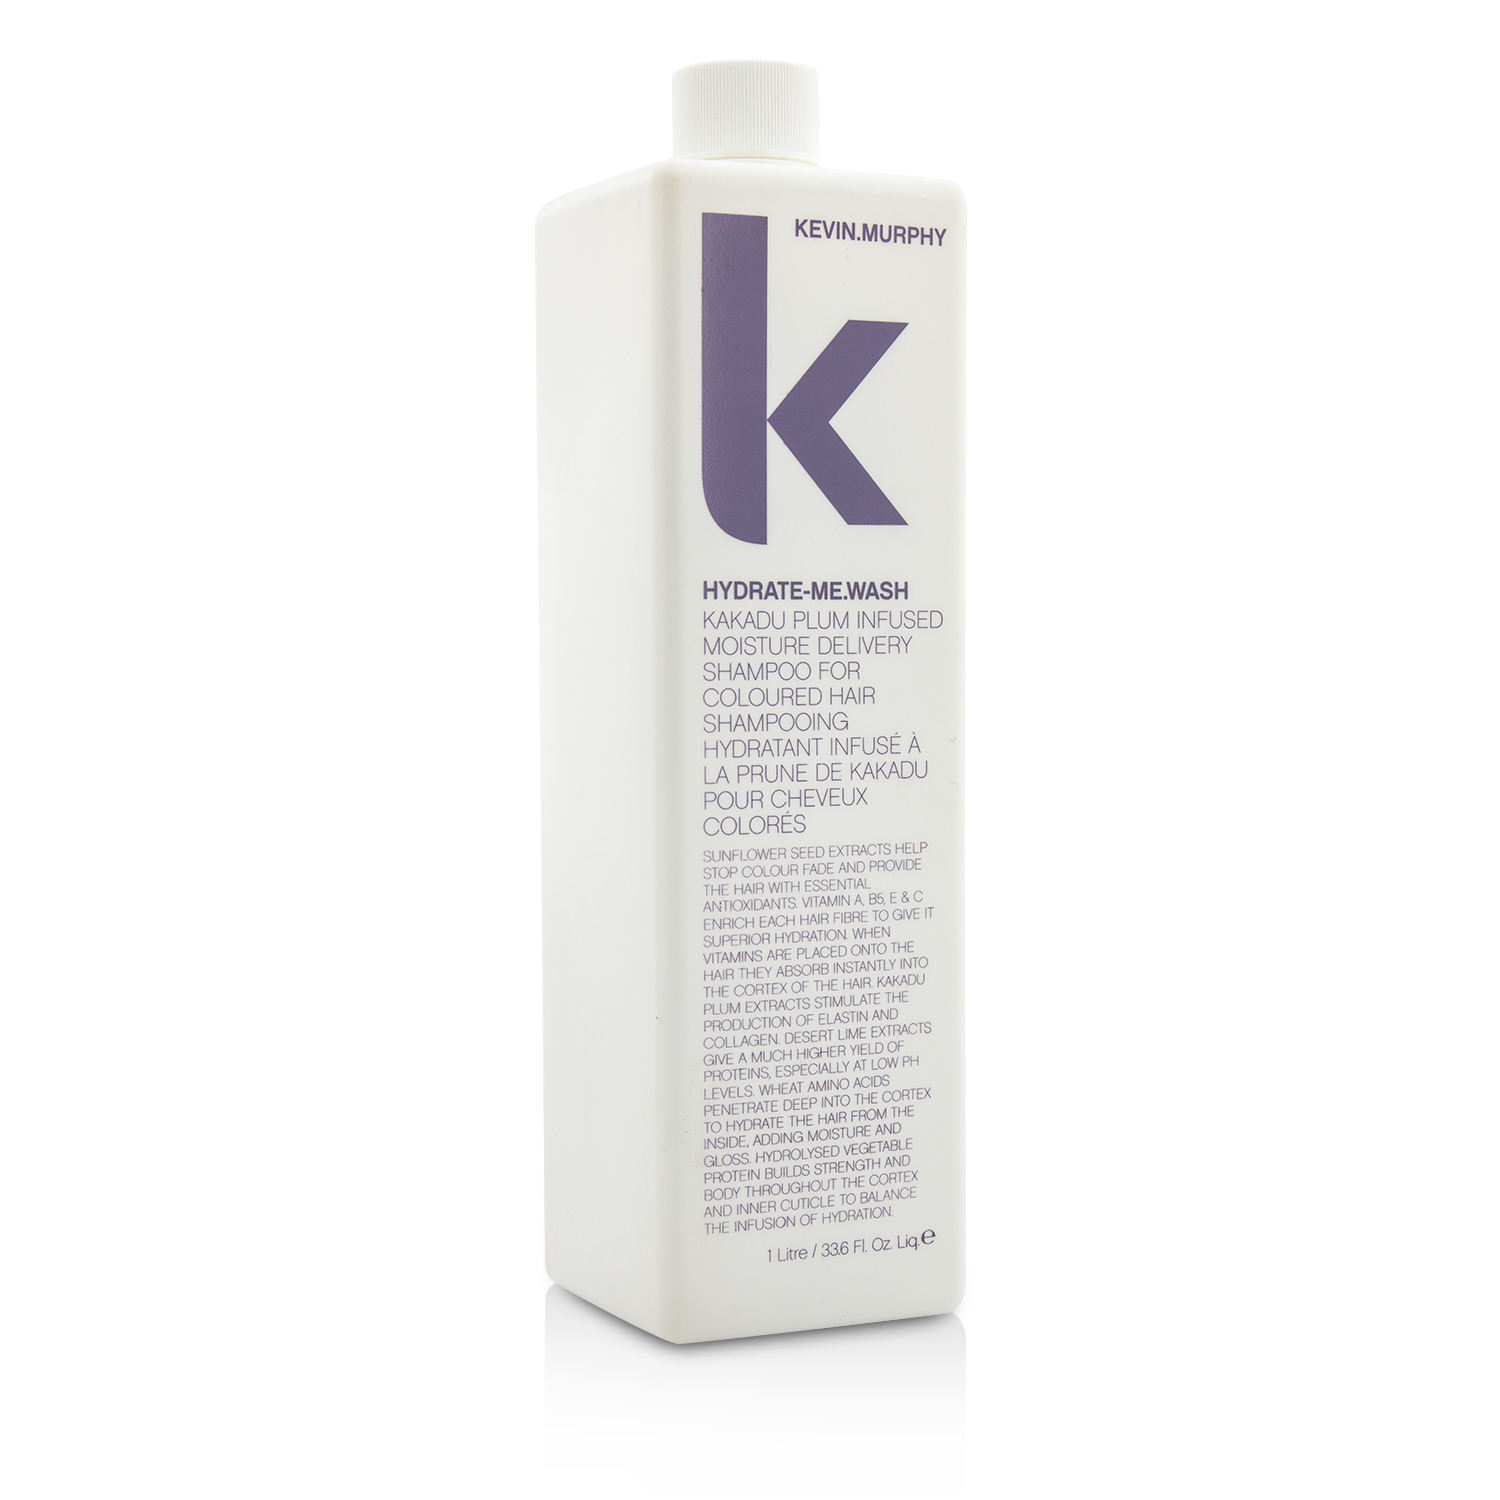 Hydrate-Me.Wash (Kakadu Plum Infused Moisture Delivery Shampoo - For Coloured Hair) Kevin.Murphy Image